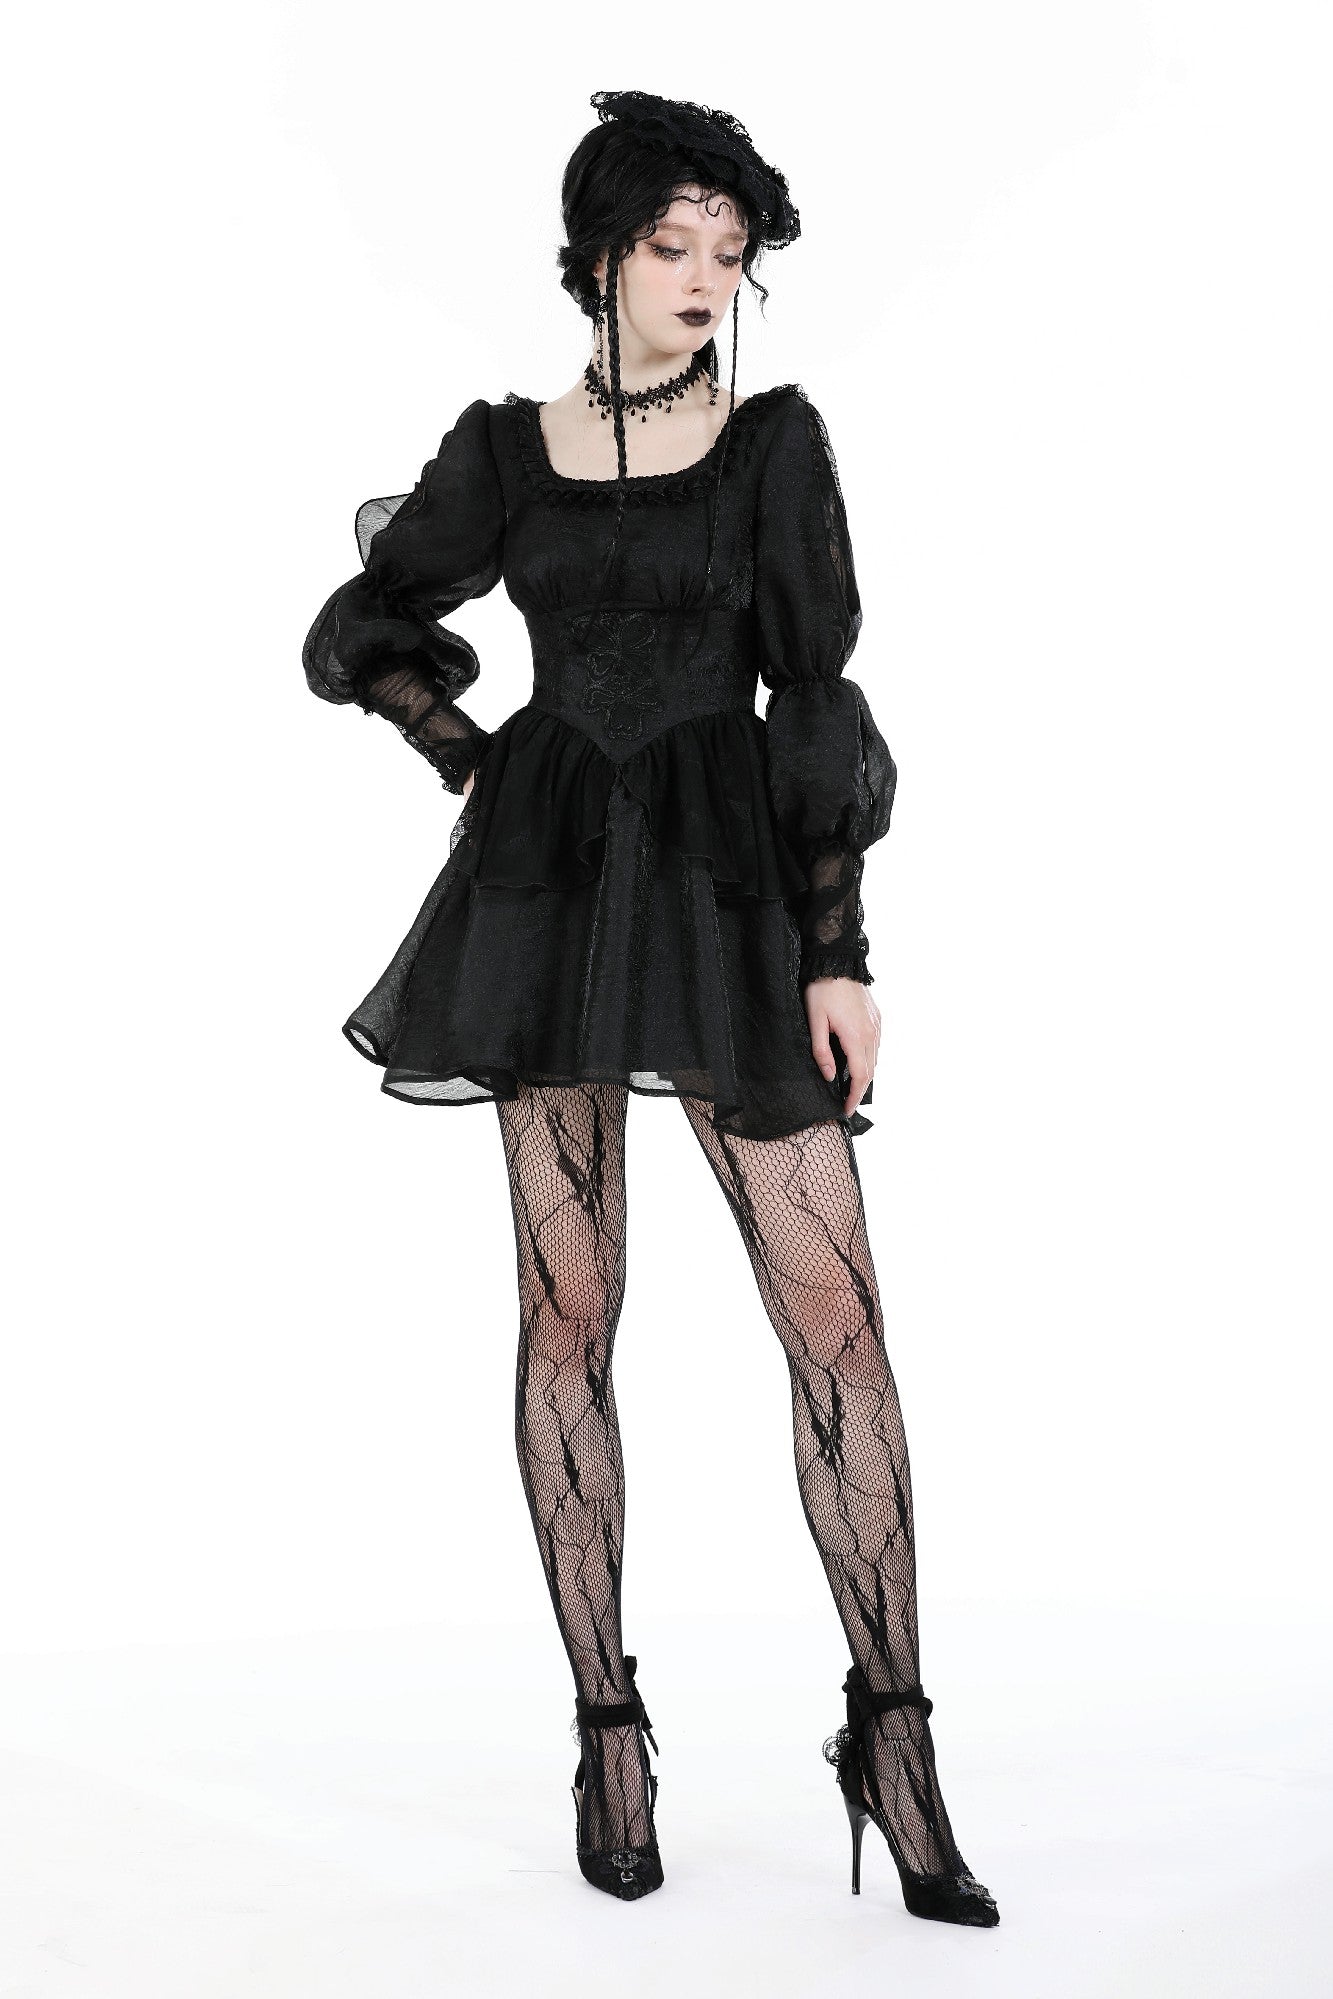 Gothic Spring Bubble Sleeve Dress by Dark In Love